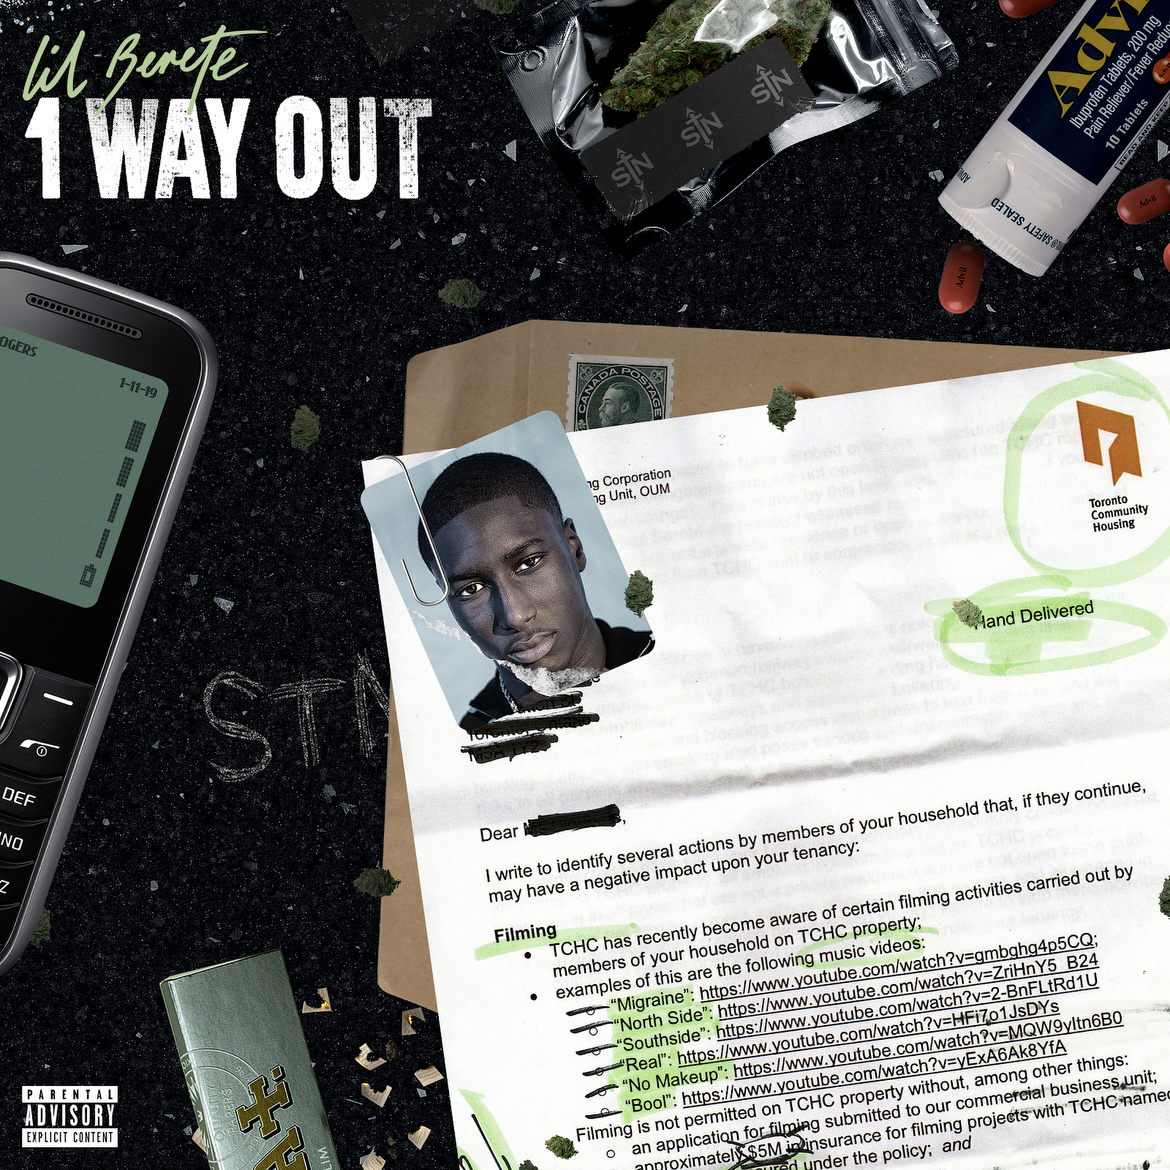 Lil Berete Announces New Mixed Tape 1 Way Out'